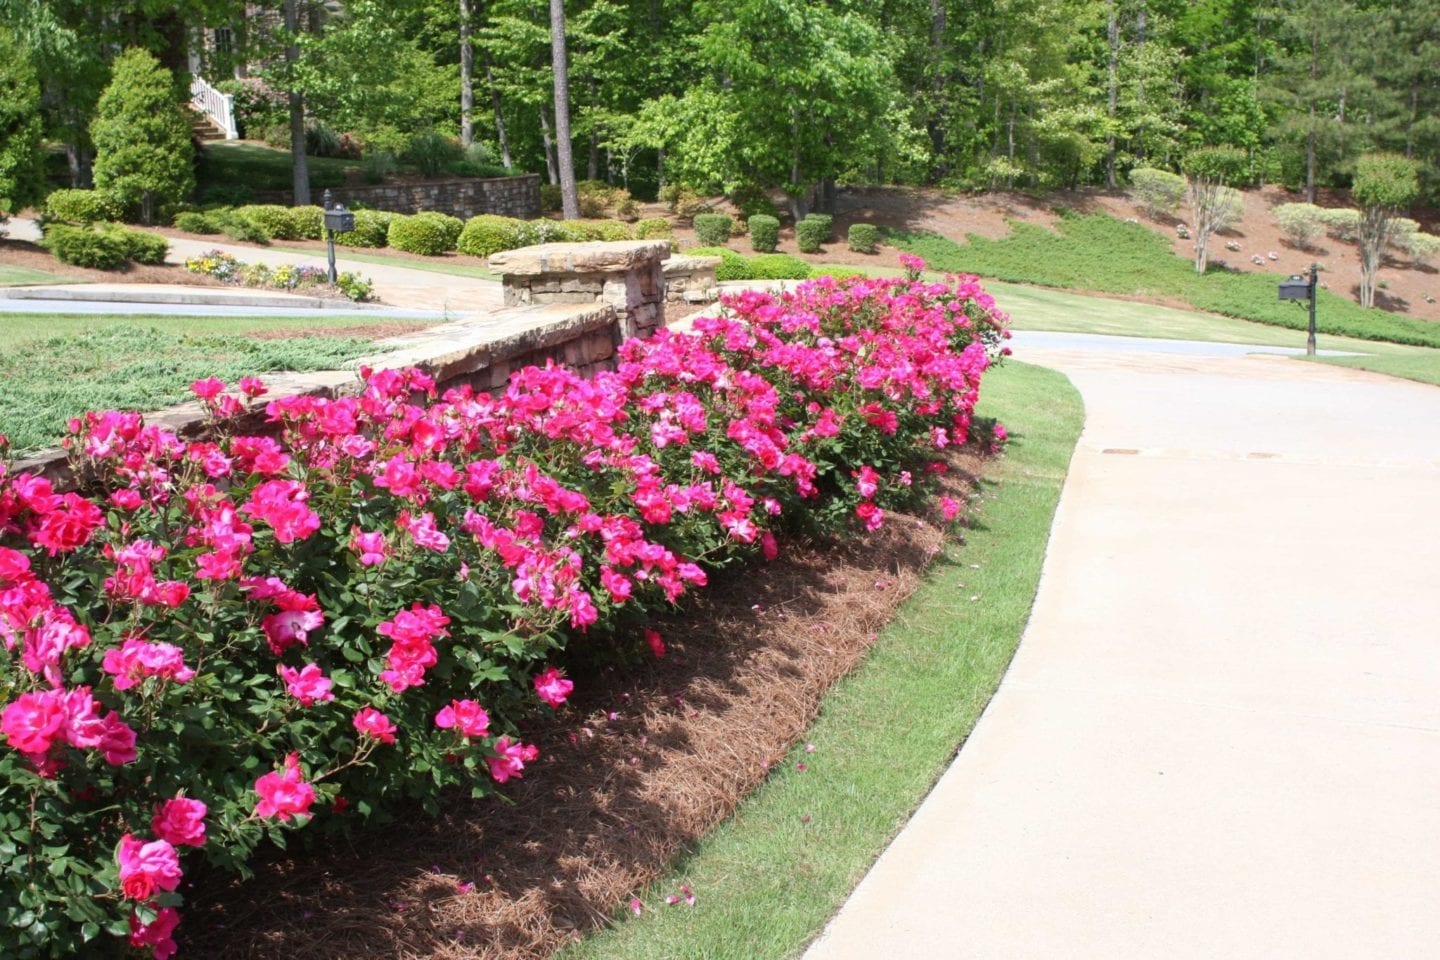 Border plants for your yard. Plants with a lot of colorful blooms.